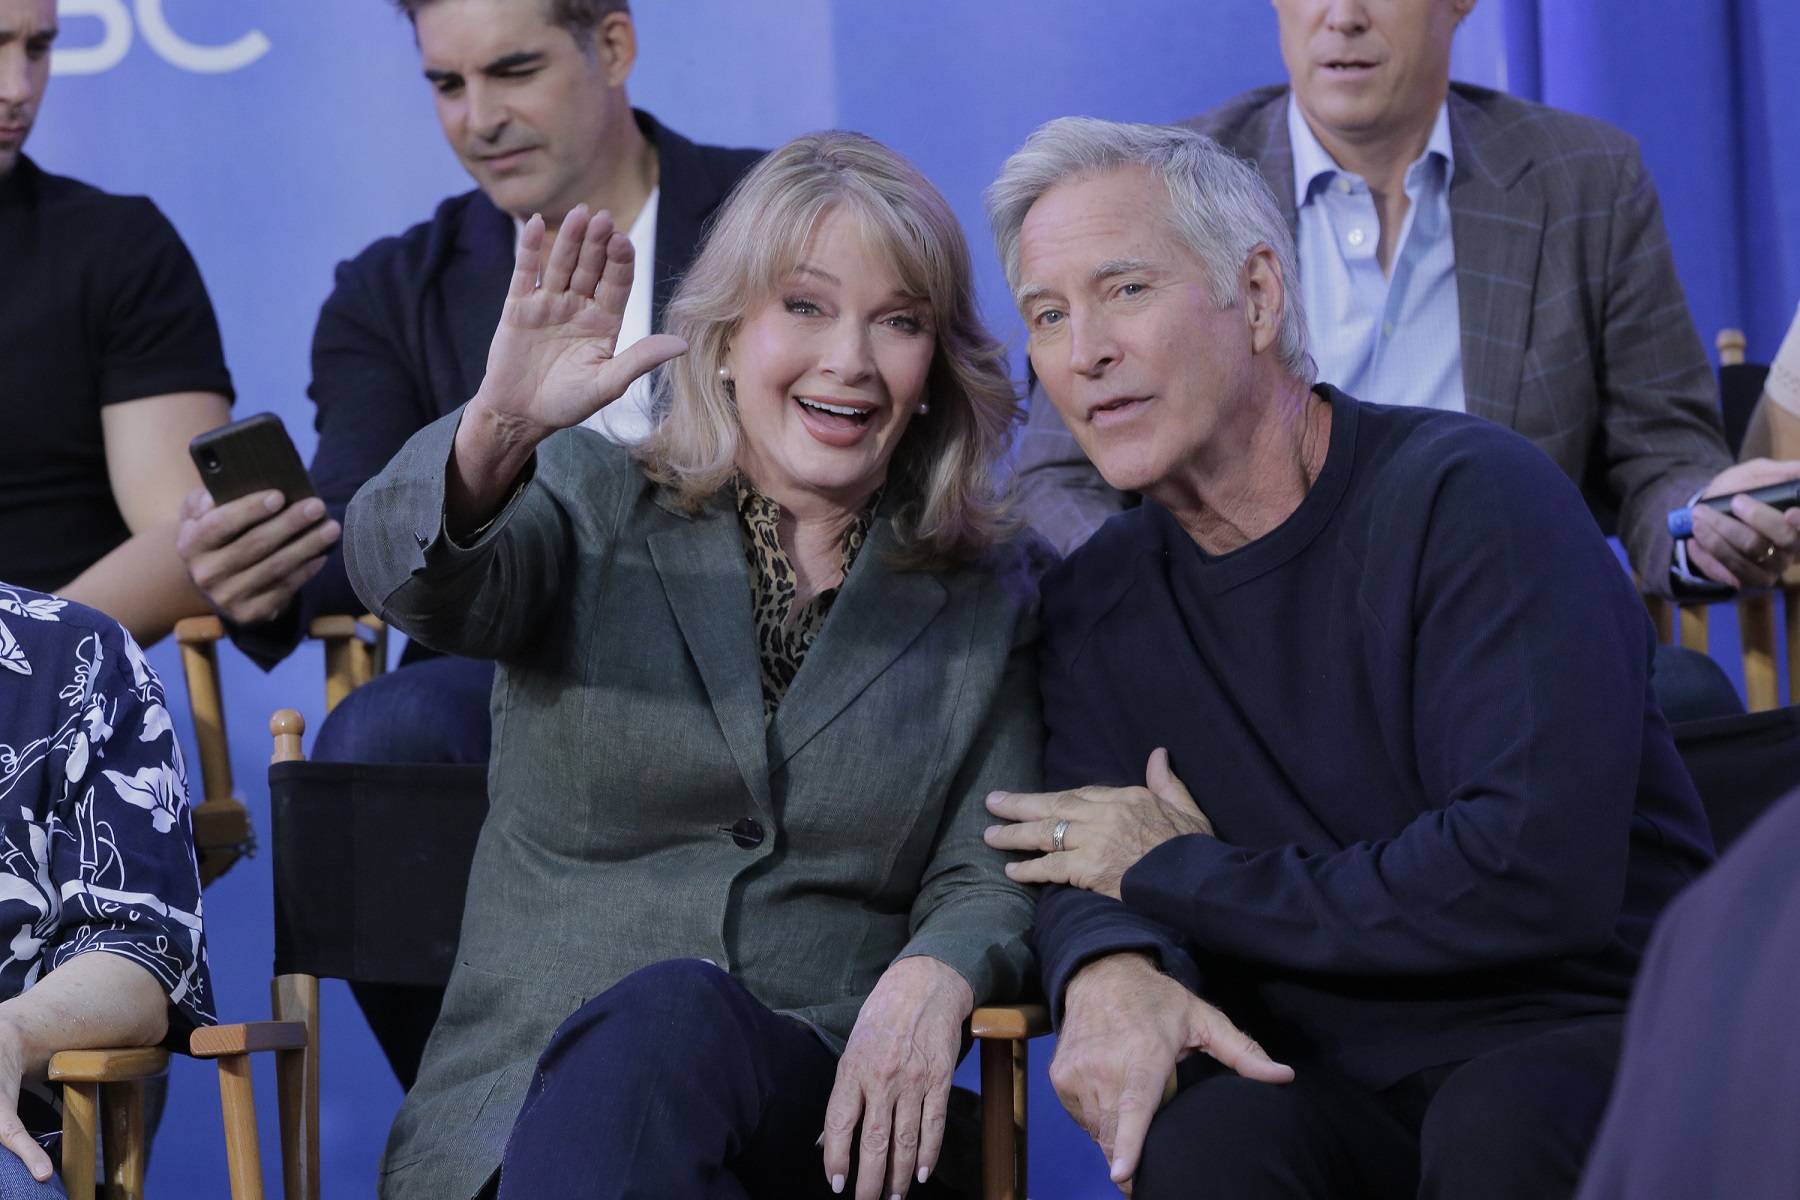 ‘Days of Our Lives’ This Week: Marlena and John Hope to Drive the Devil Away